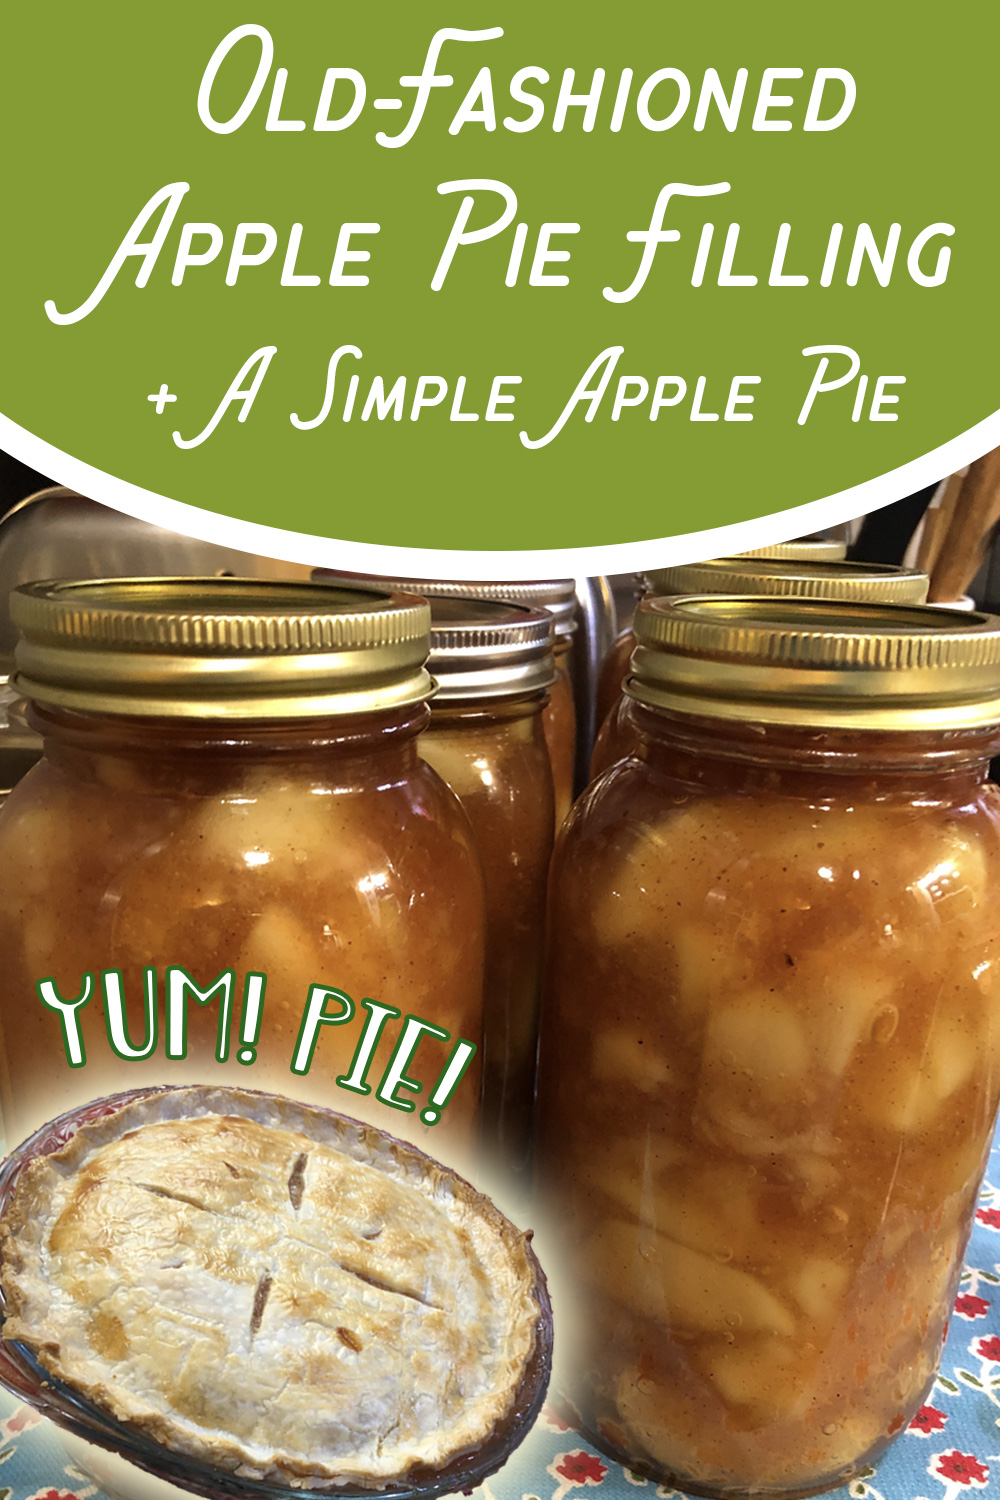 How to Make and Can Old-Fashioned Apple Pie Filling (+ a Simple Apple Pie!)